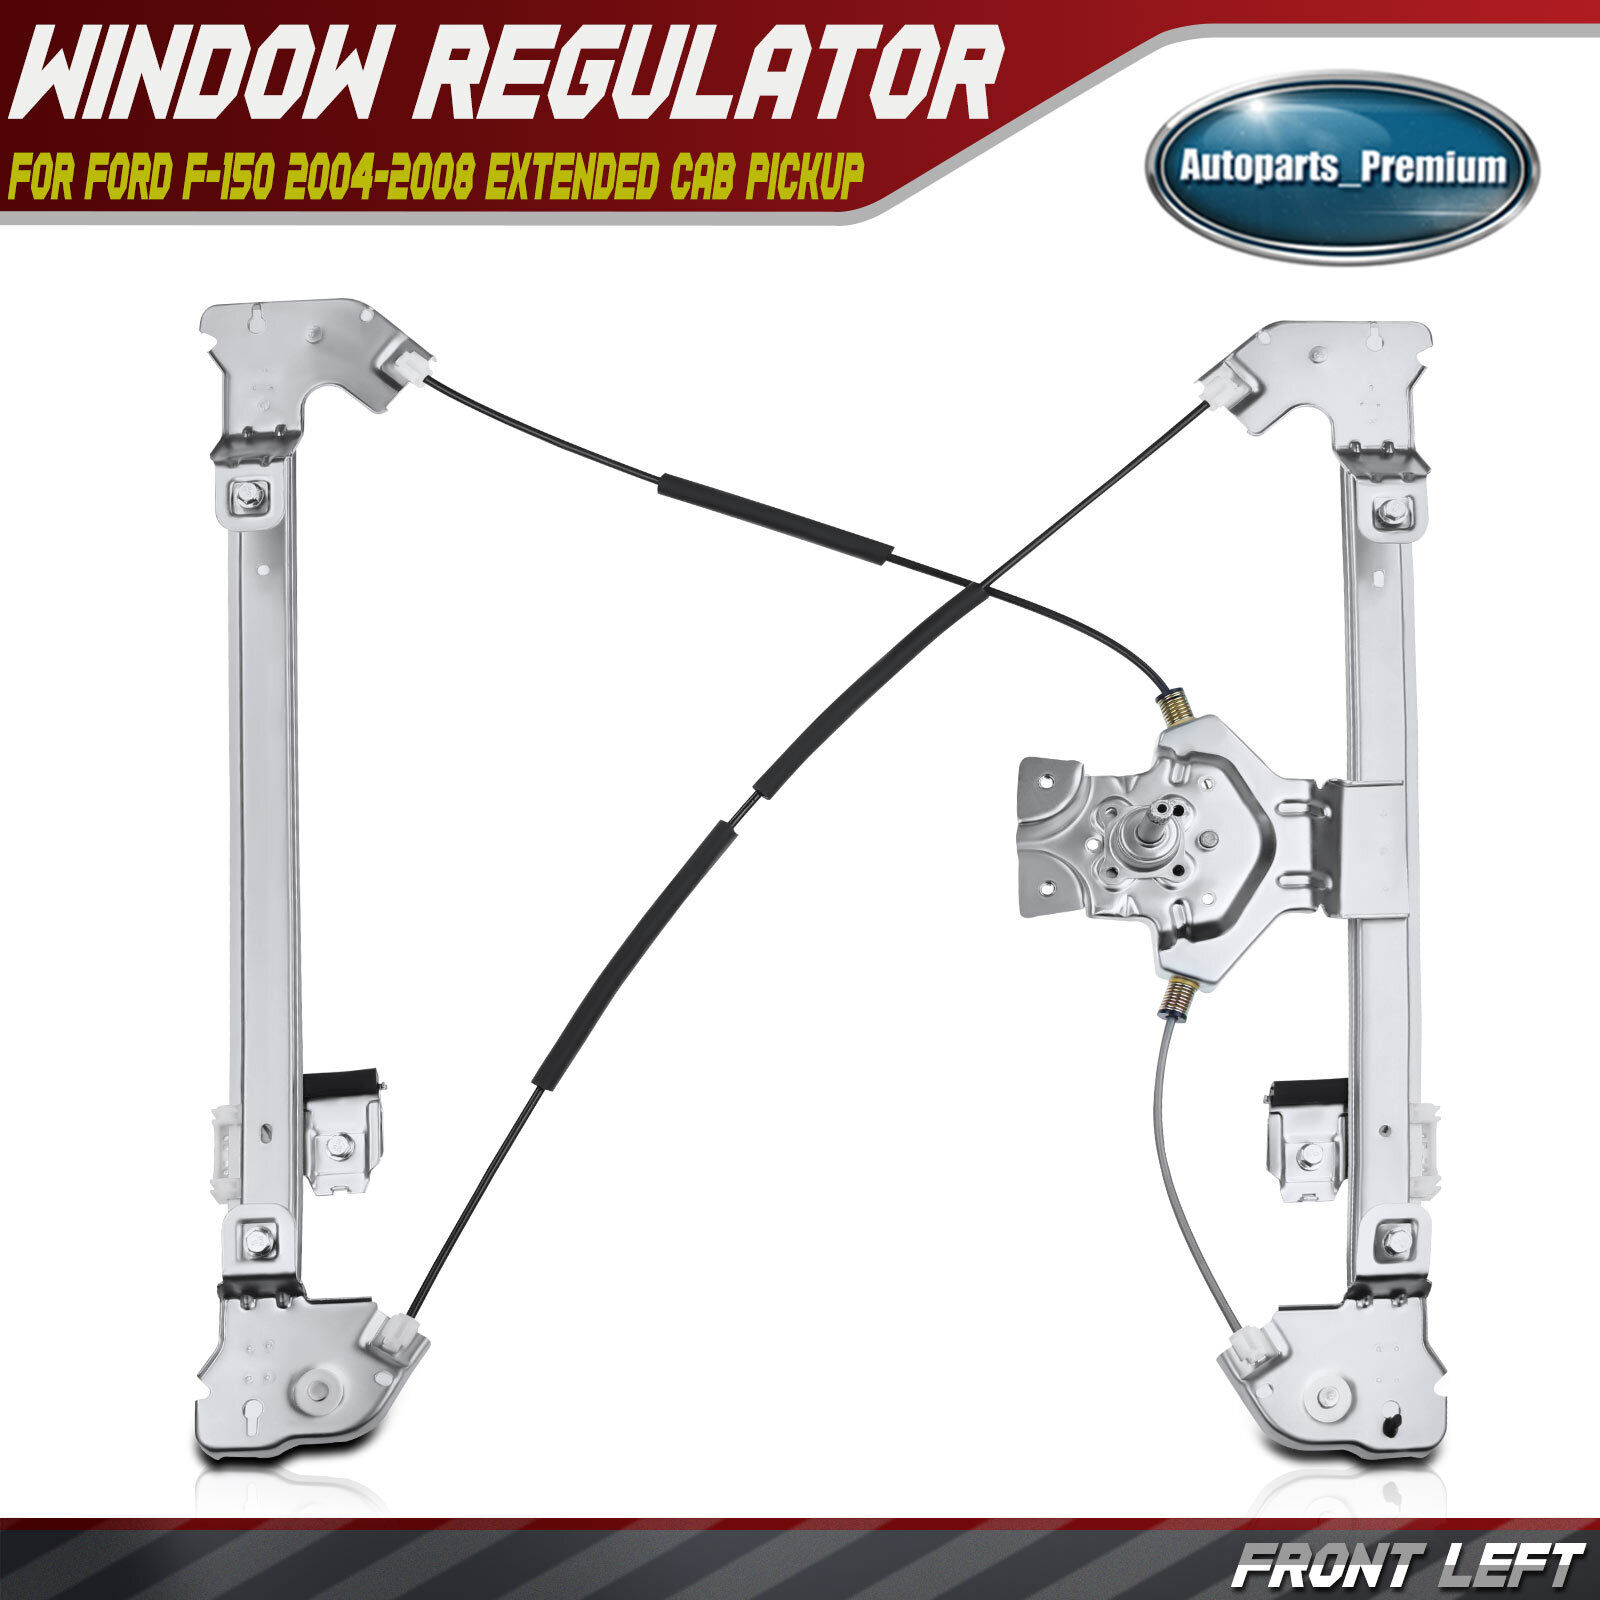 Manual Window Regulator for Ford F-150 2004-2008 Extended Cab Pickup Front Left